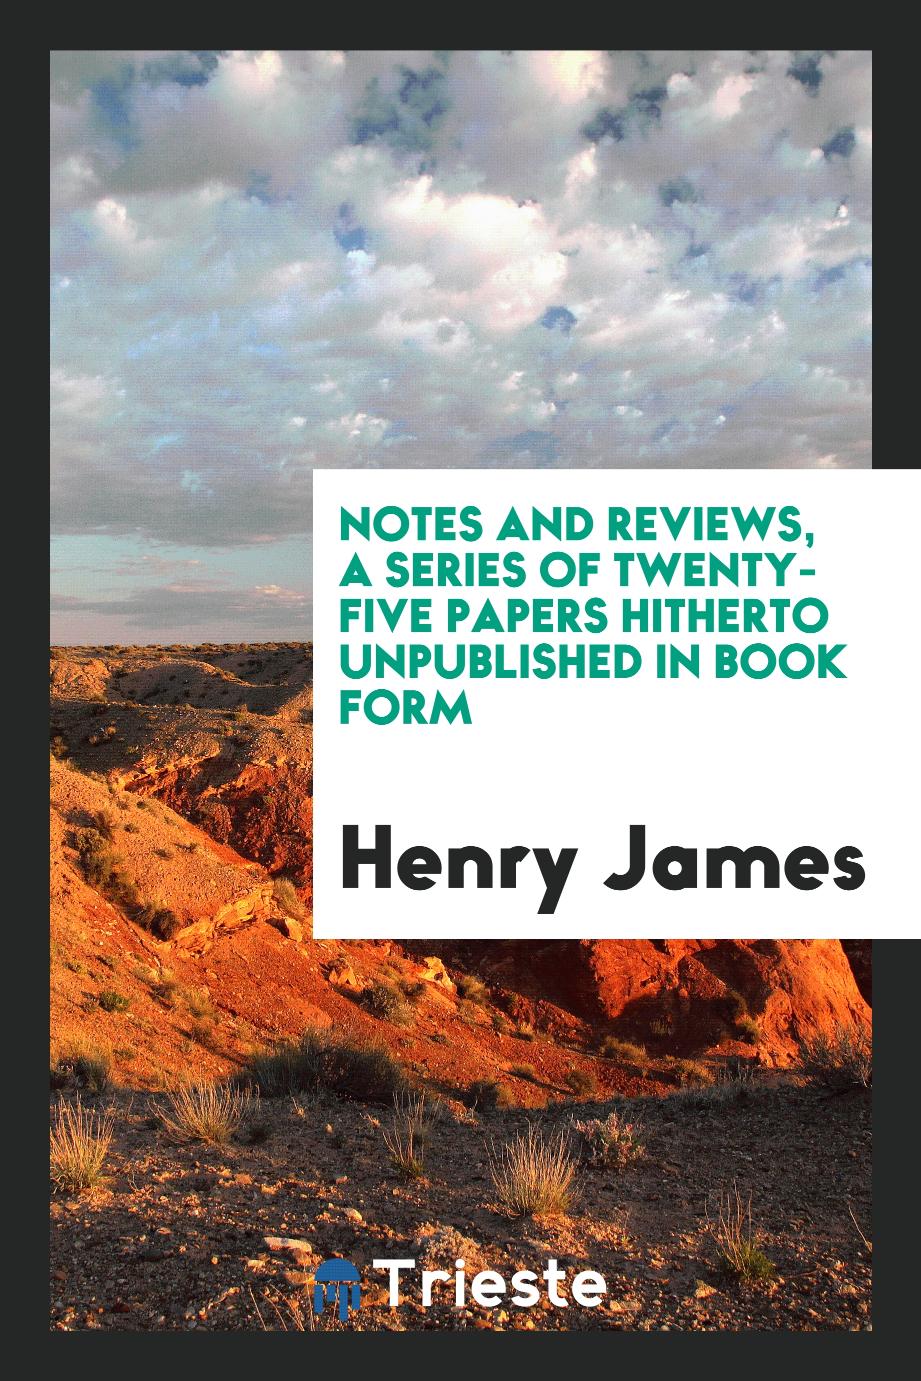 Henry James - Notes and reviews, a series of twenty-five papers hitherto unpublished in book form